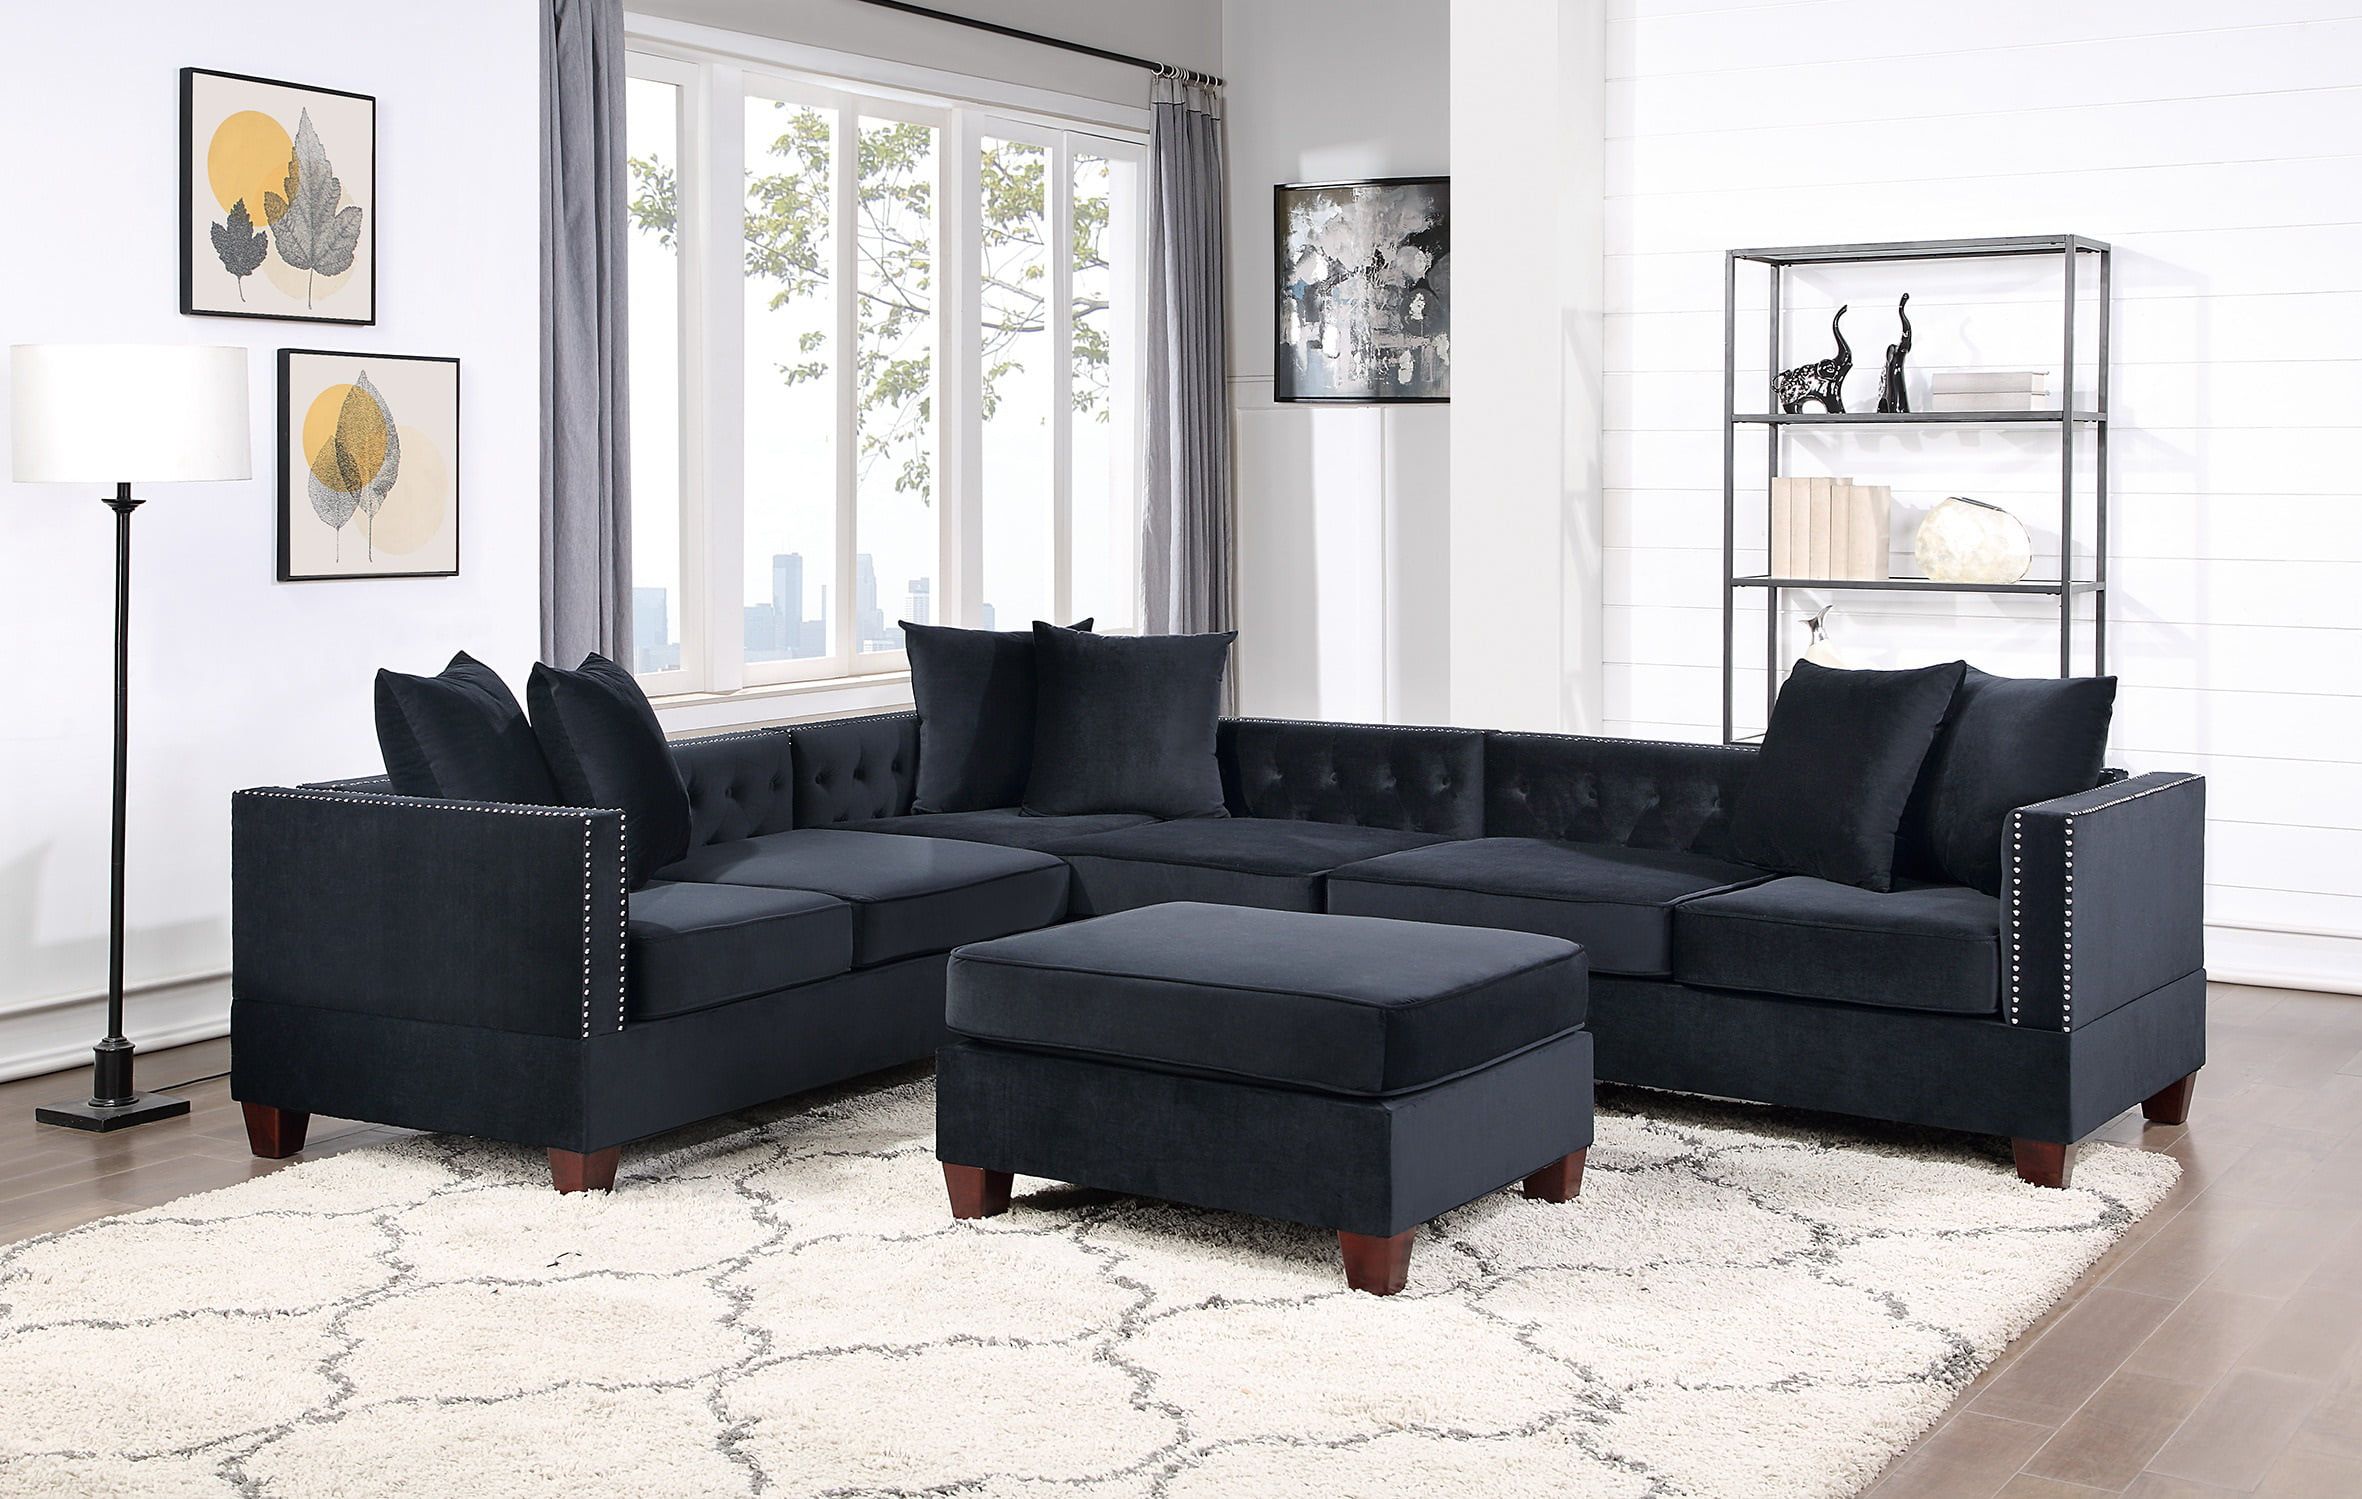 Black Velvet Fabric Solidwood Sectional 4pc Set Reversible Chaise /  Loveseats Ottoman Tufted Cushion Couch Pillows Living Room – Walmart With Sectional Sofas With Ottomans And Tufted Back Cushion (Gallery 3 of 20)